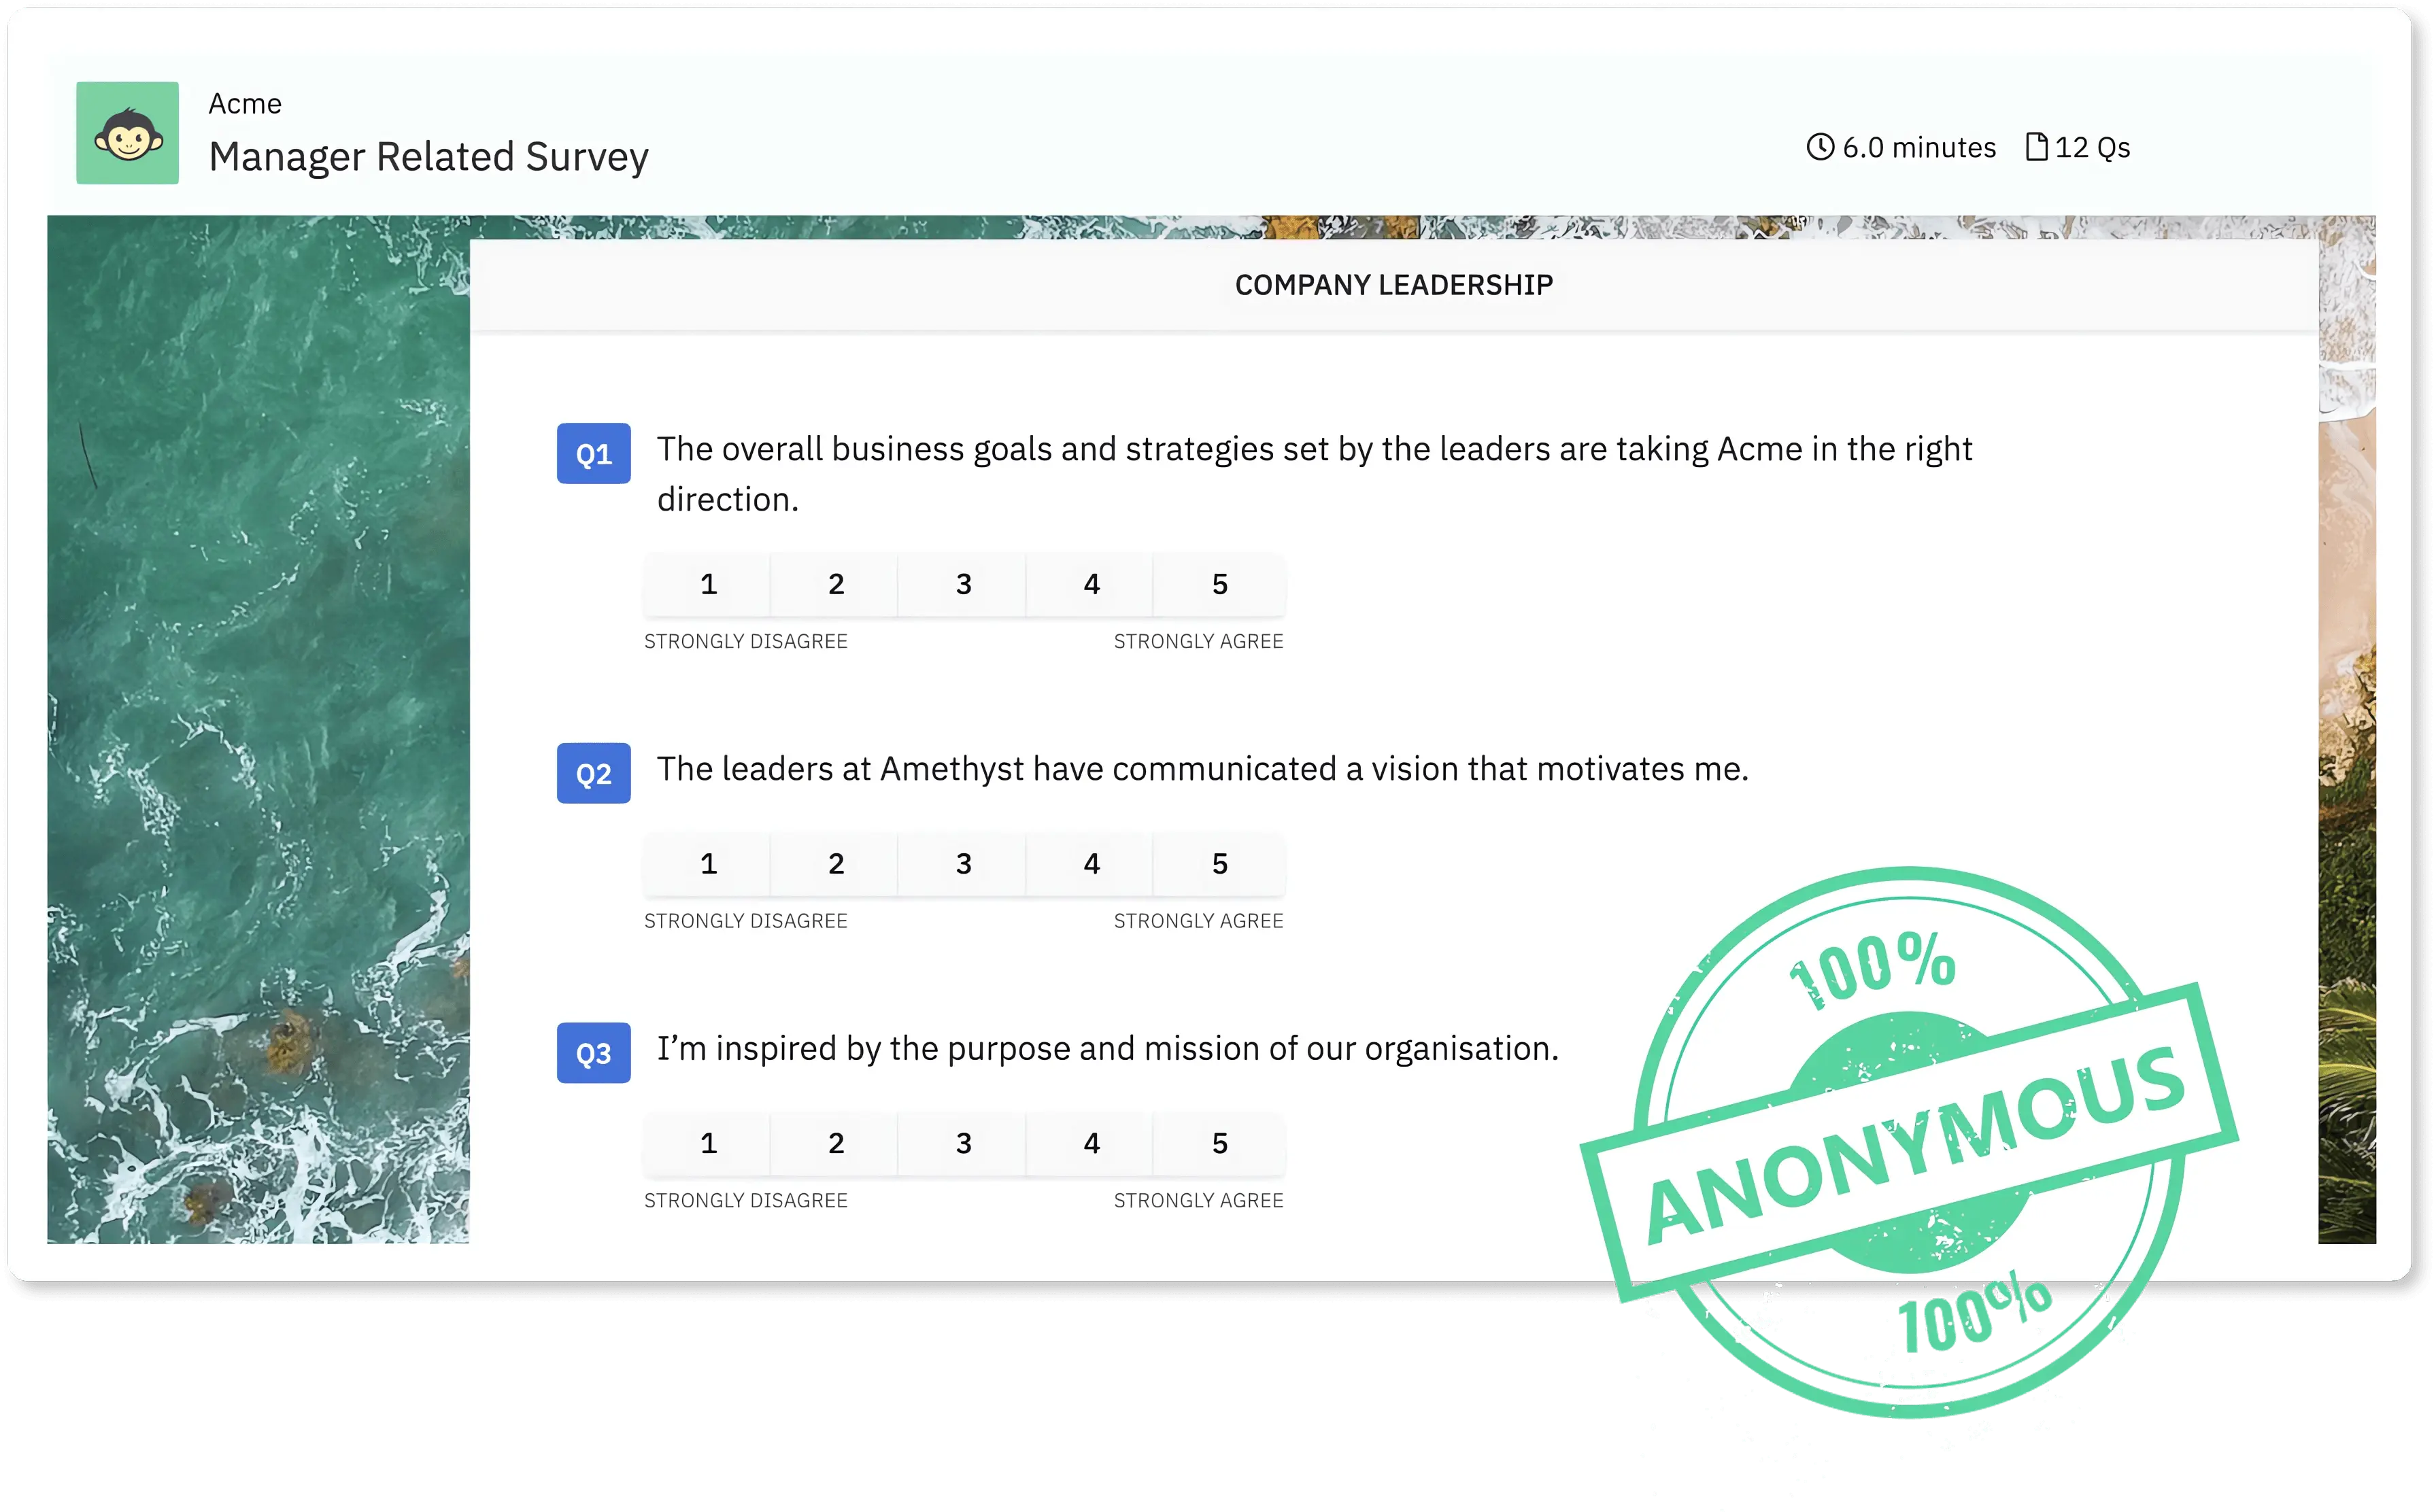 A sample of truly anonymous employee survey to get honest employee feedback